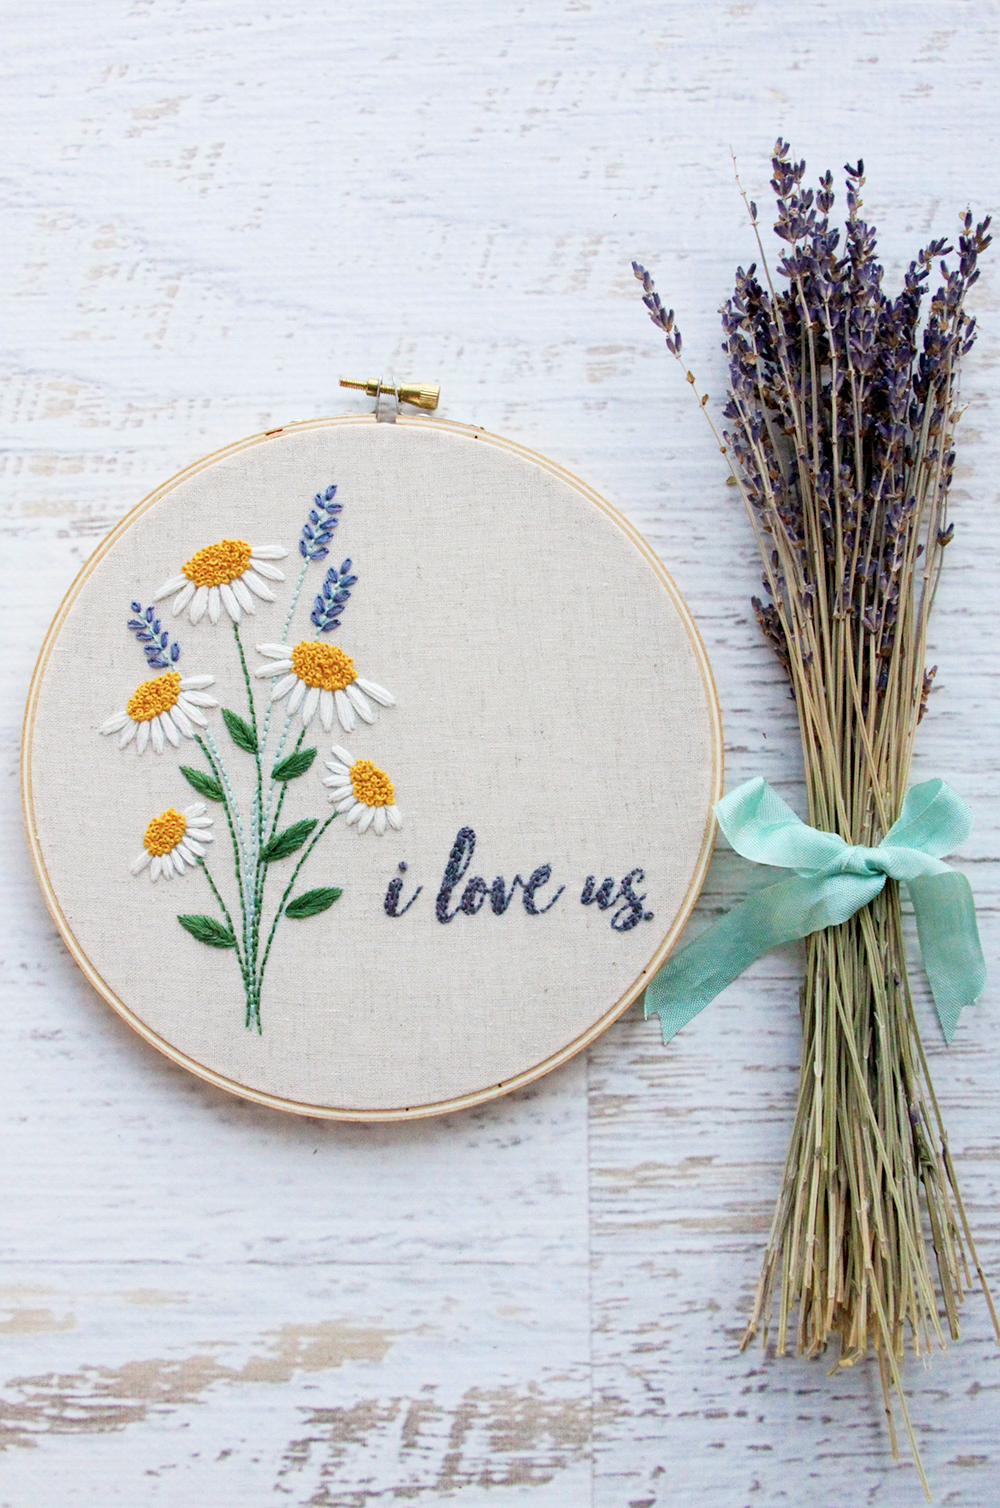 Fancy Floral: A Free Hand Embroidery Pattern! –